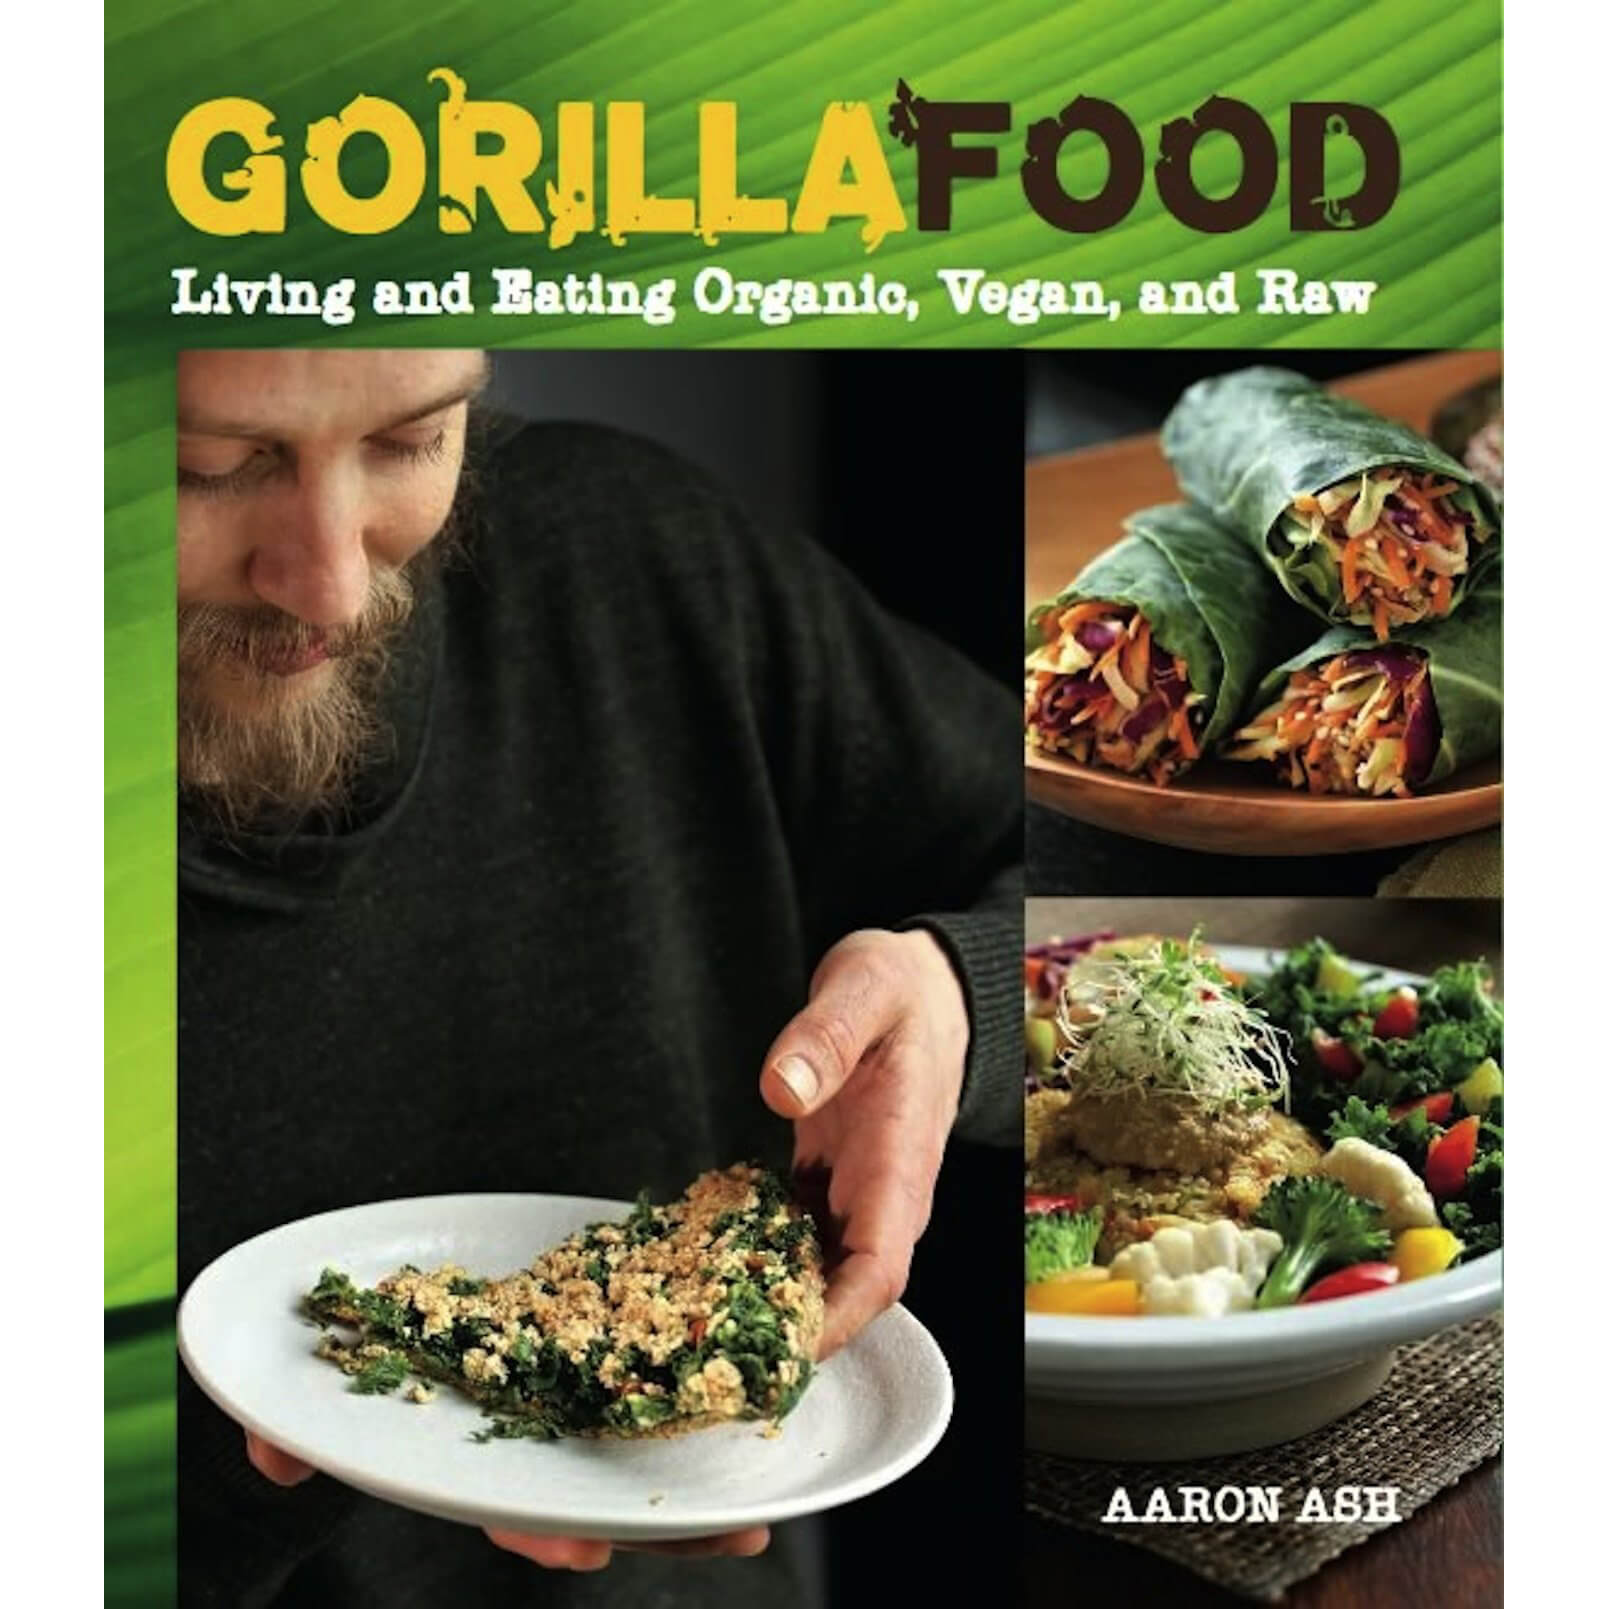 Gorilla Food: Living and Eating Organic, Vegan and Raw front cover.